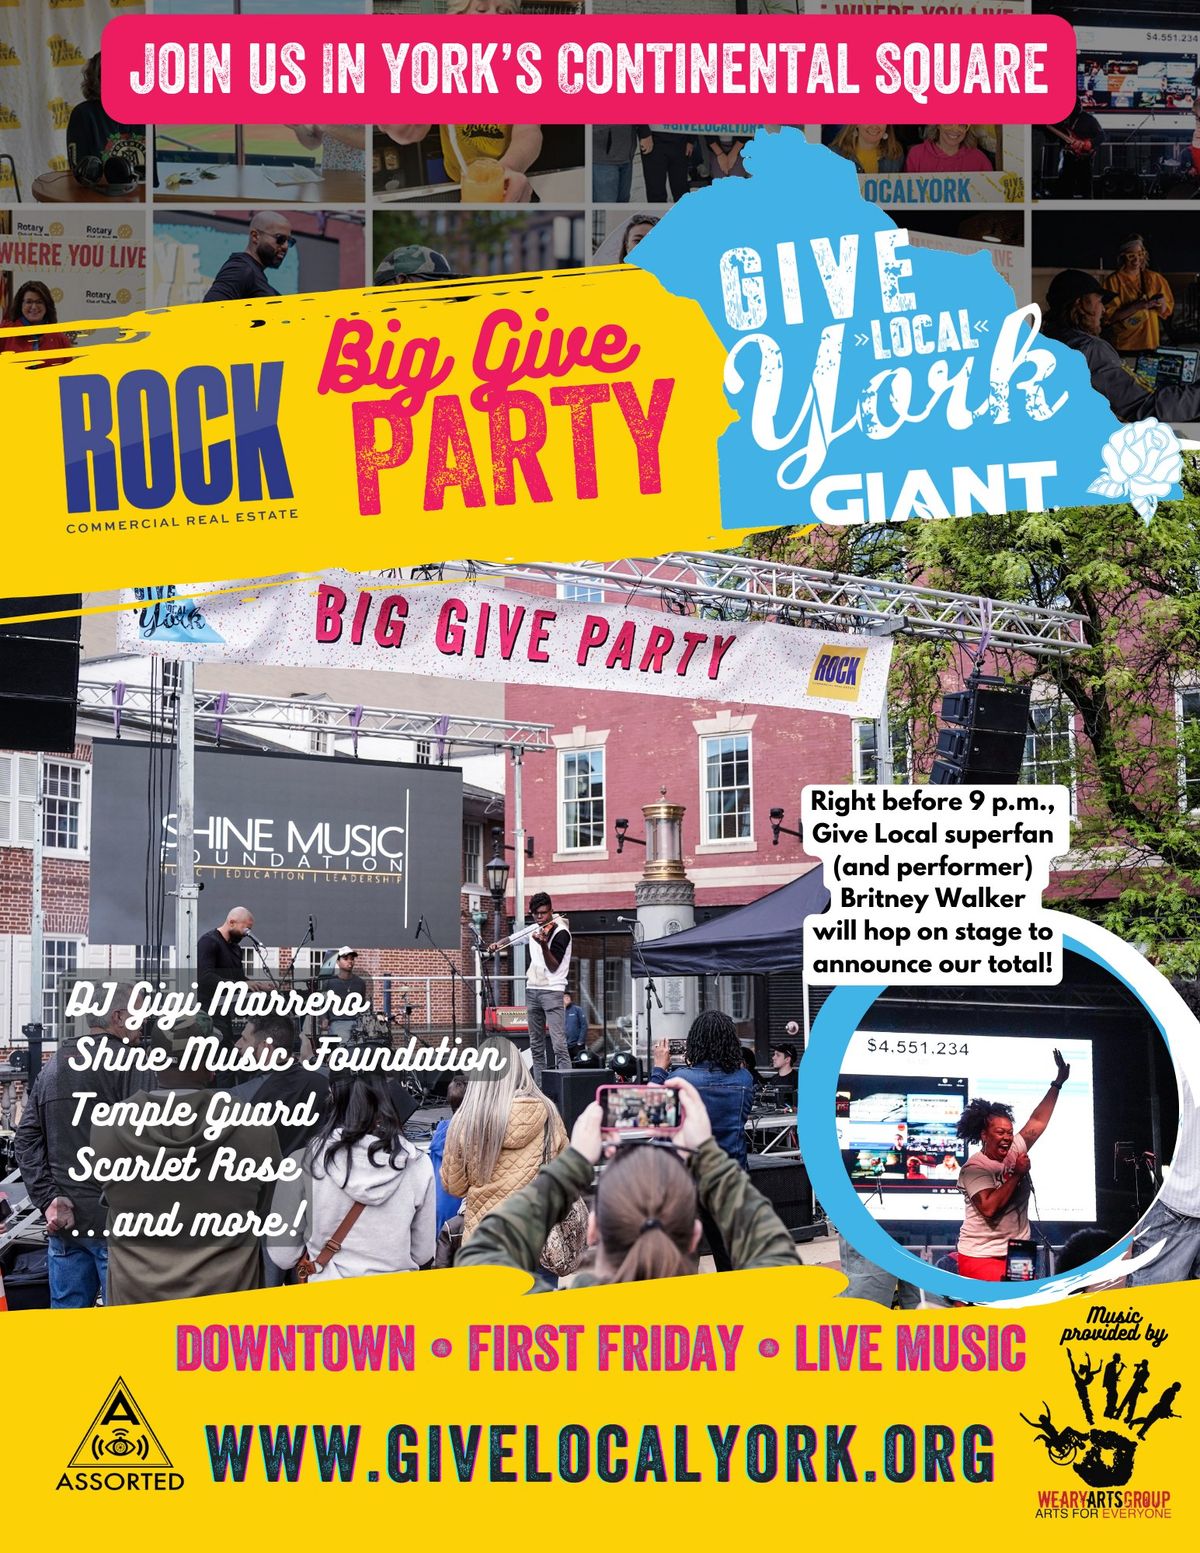 Give Local York Big Give Party presented by ROCK